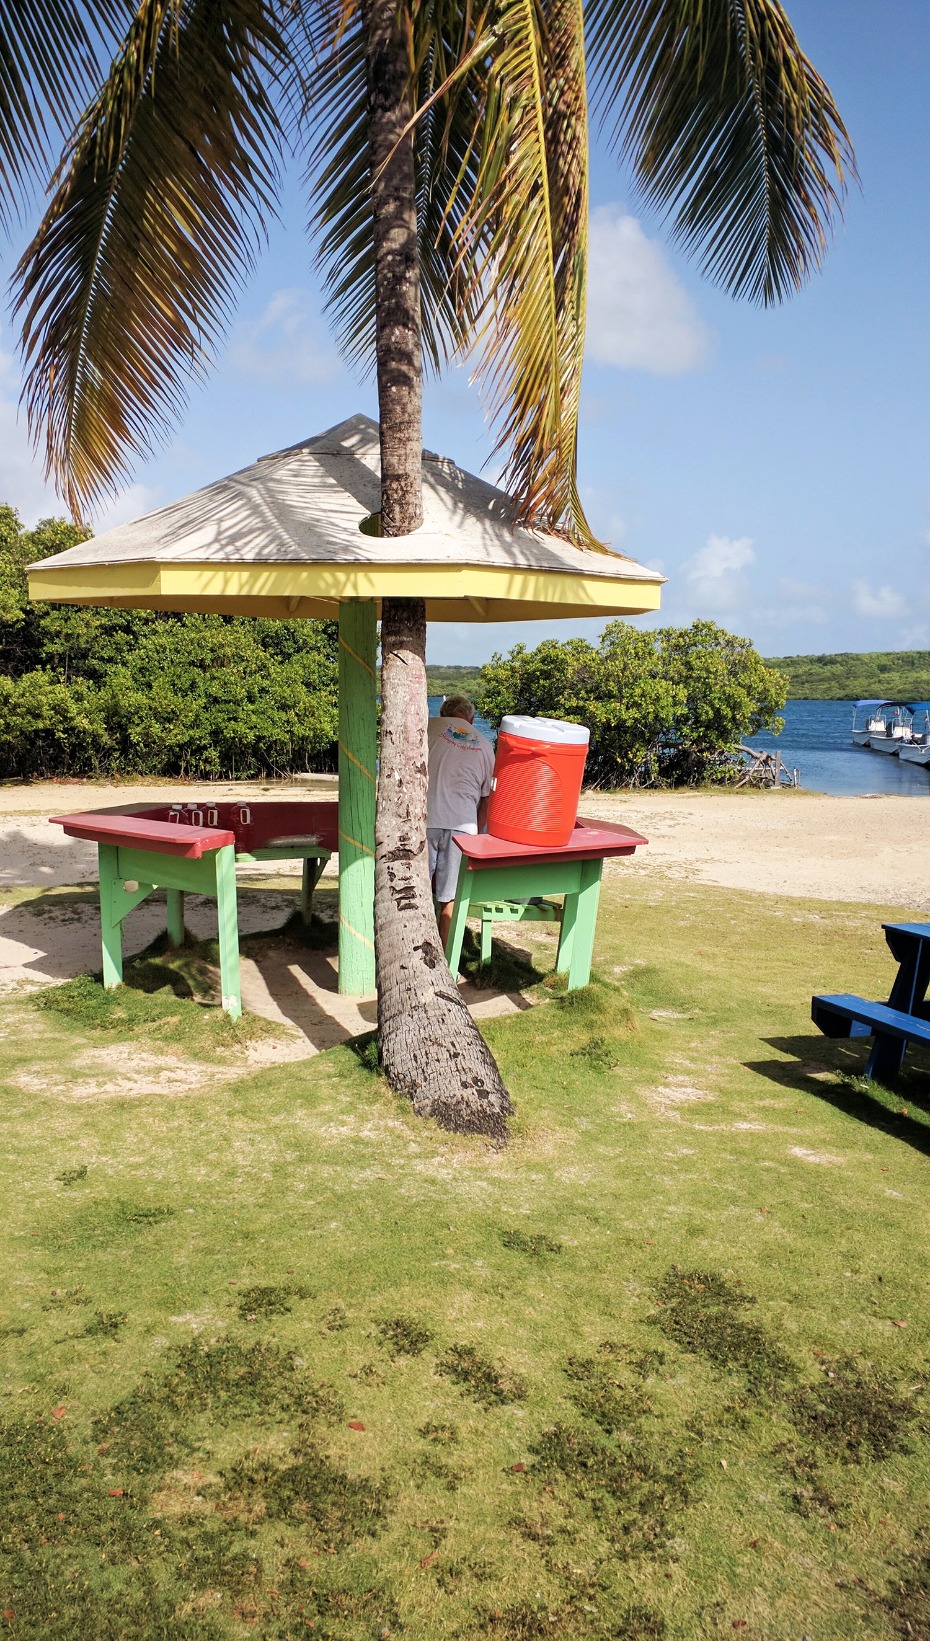 Rum punch stand in Antigua